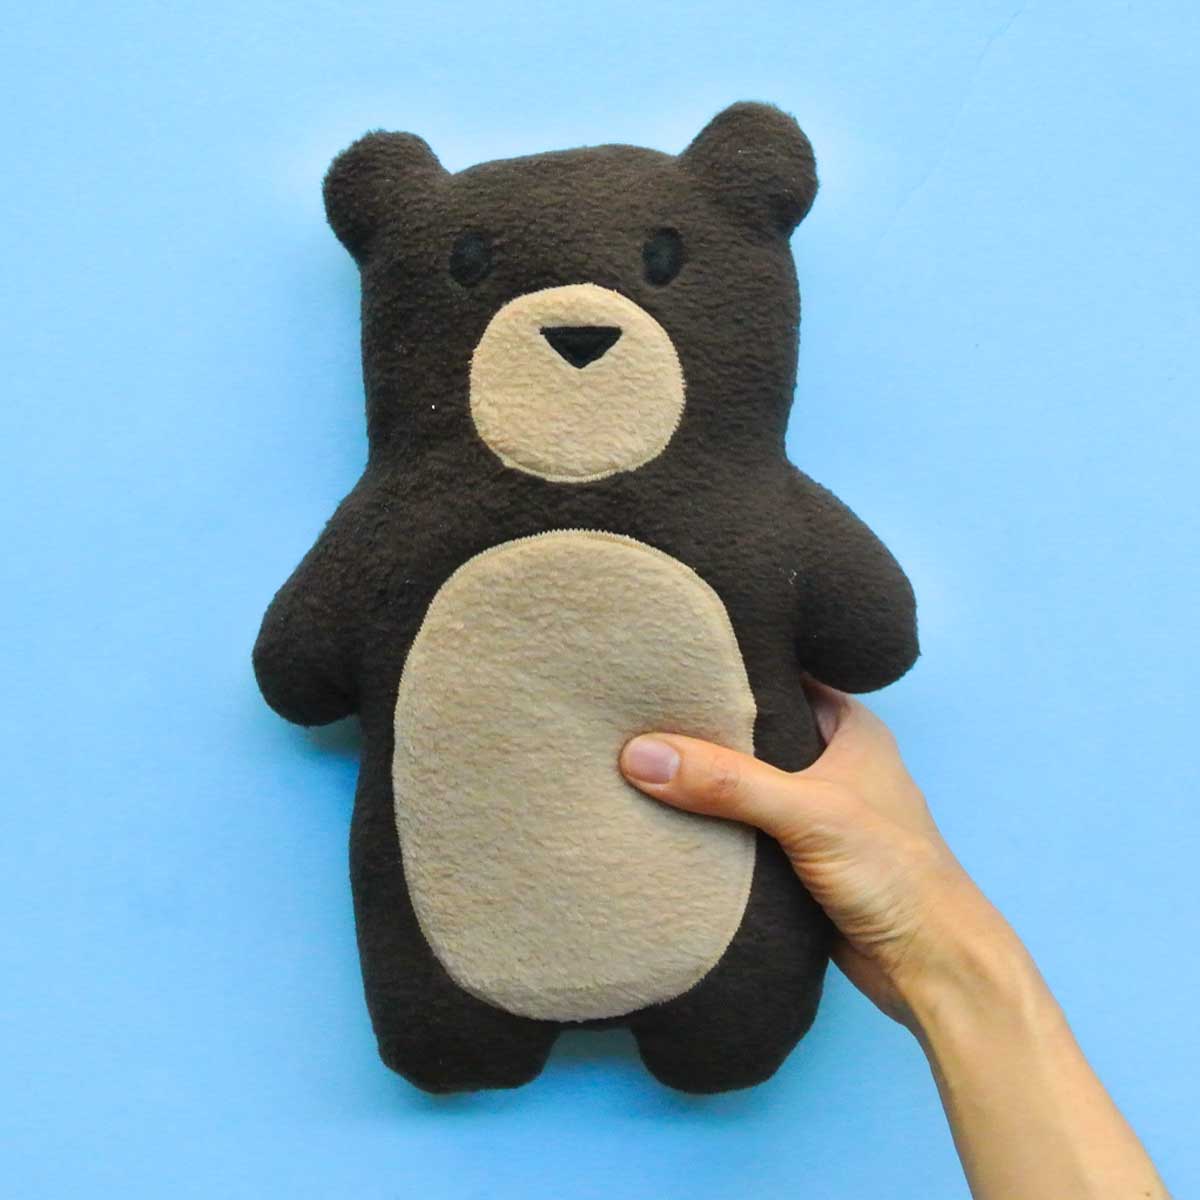 How to Make A Plushie: Easy Beginner's Guide (Free Pattern) - Mindy Makes